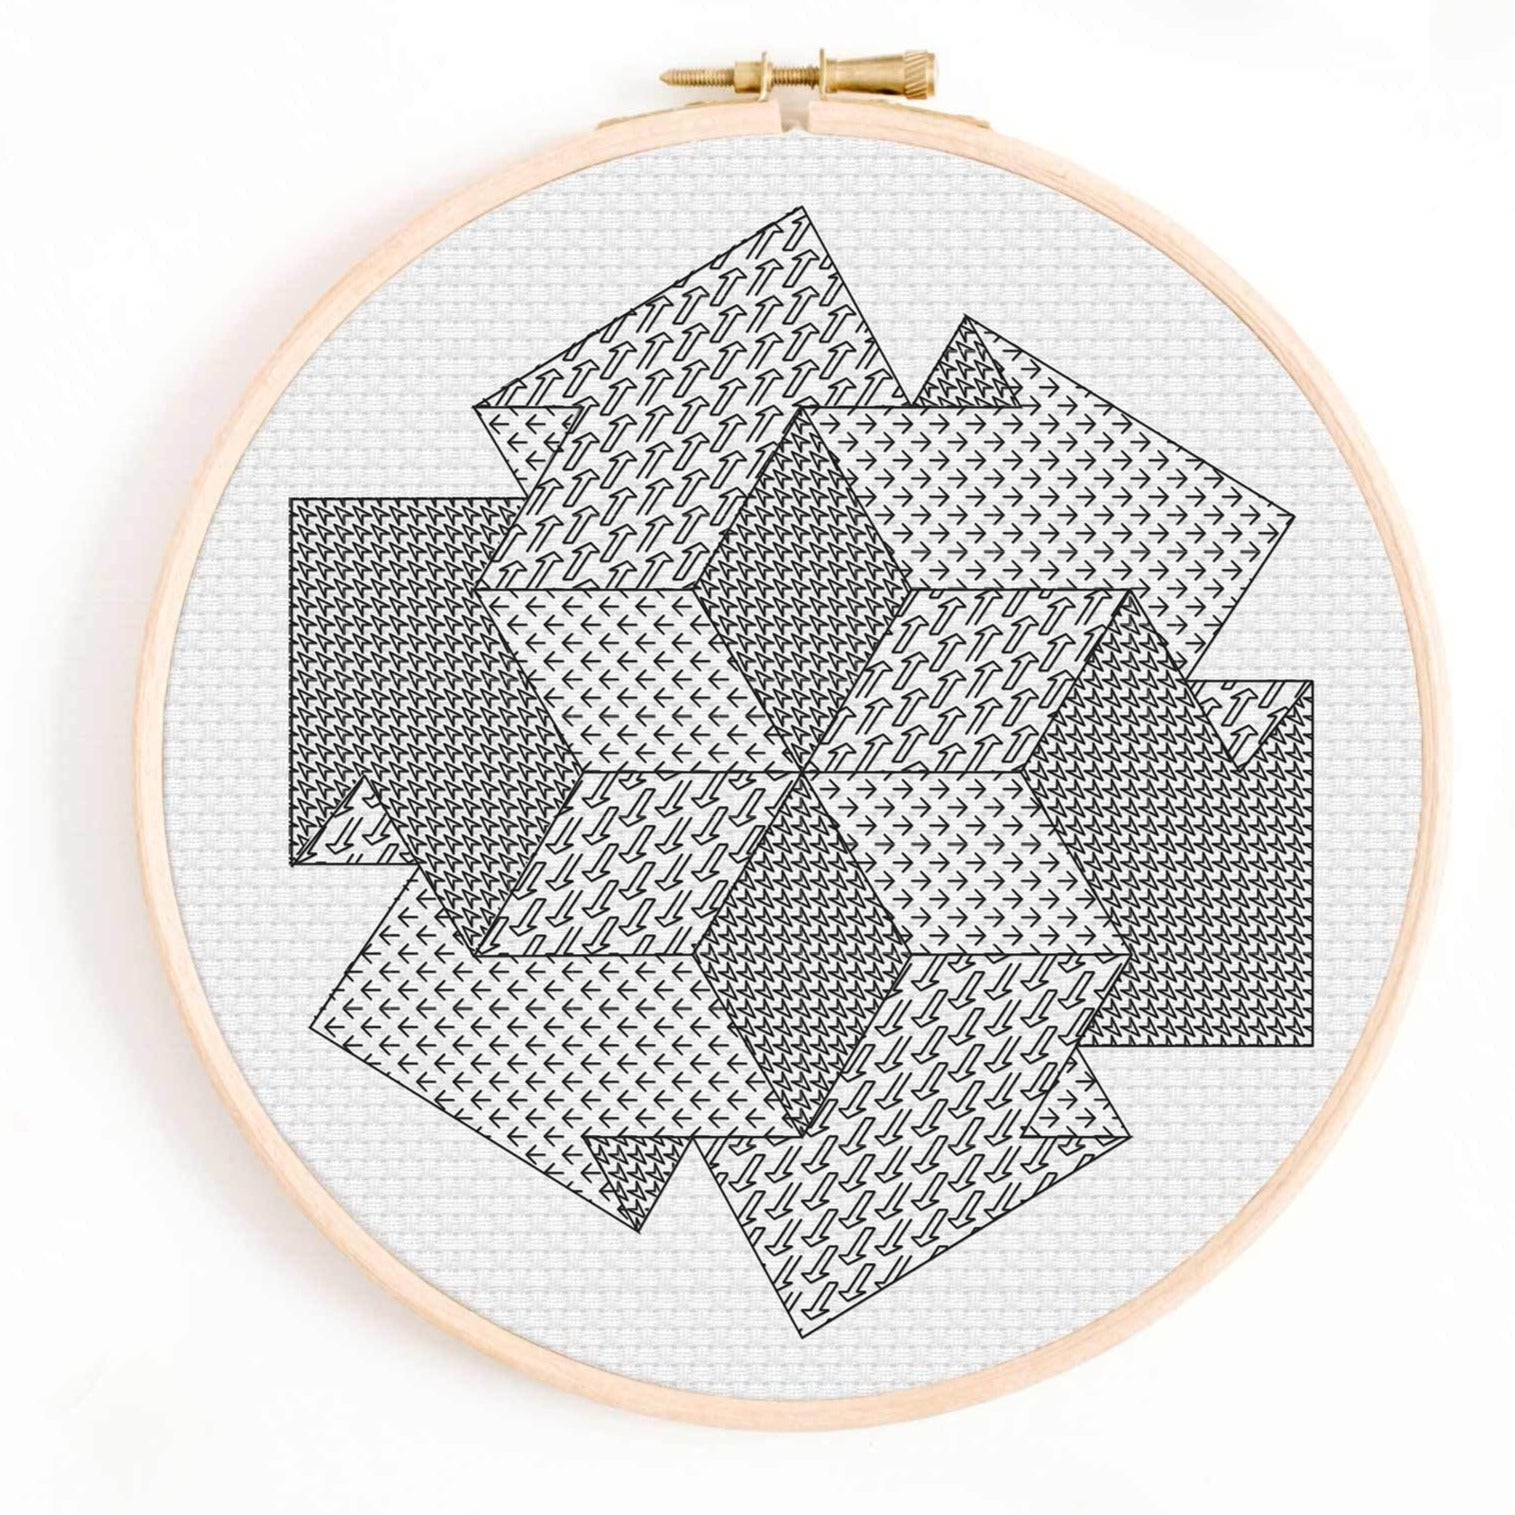 What do I need for blackwork embroidery